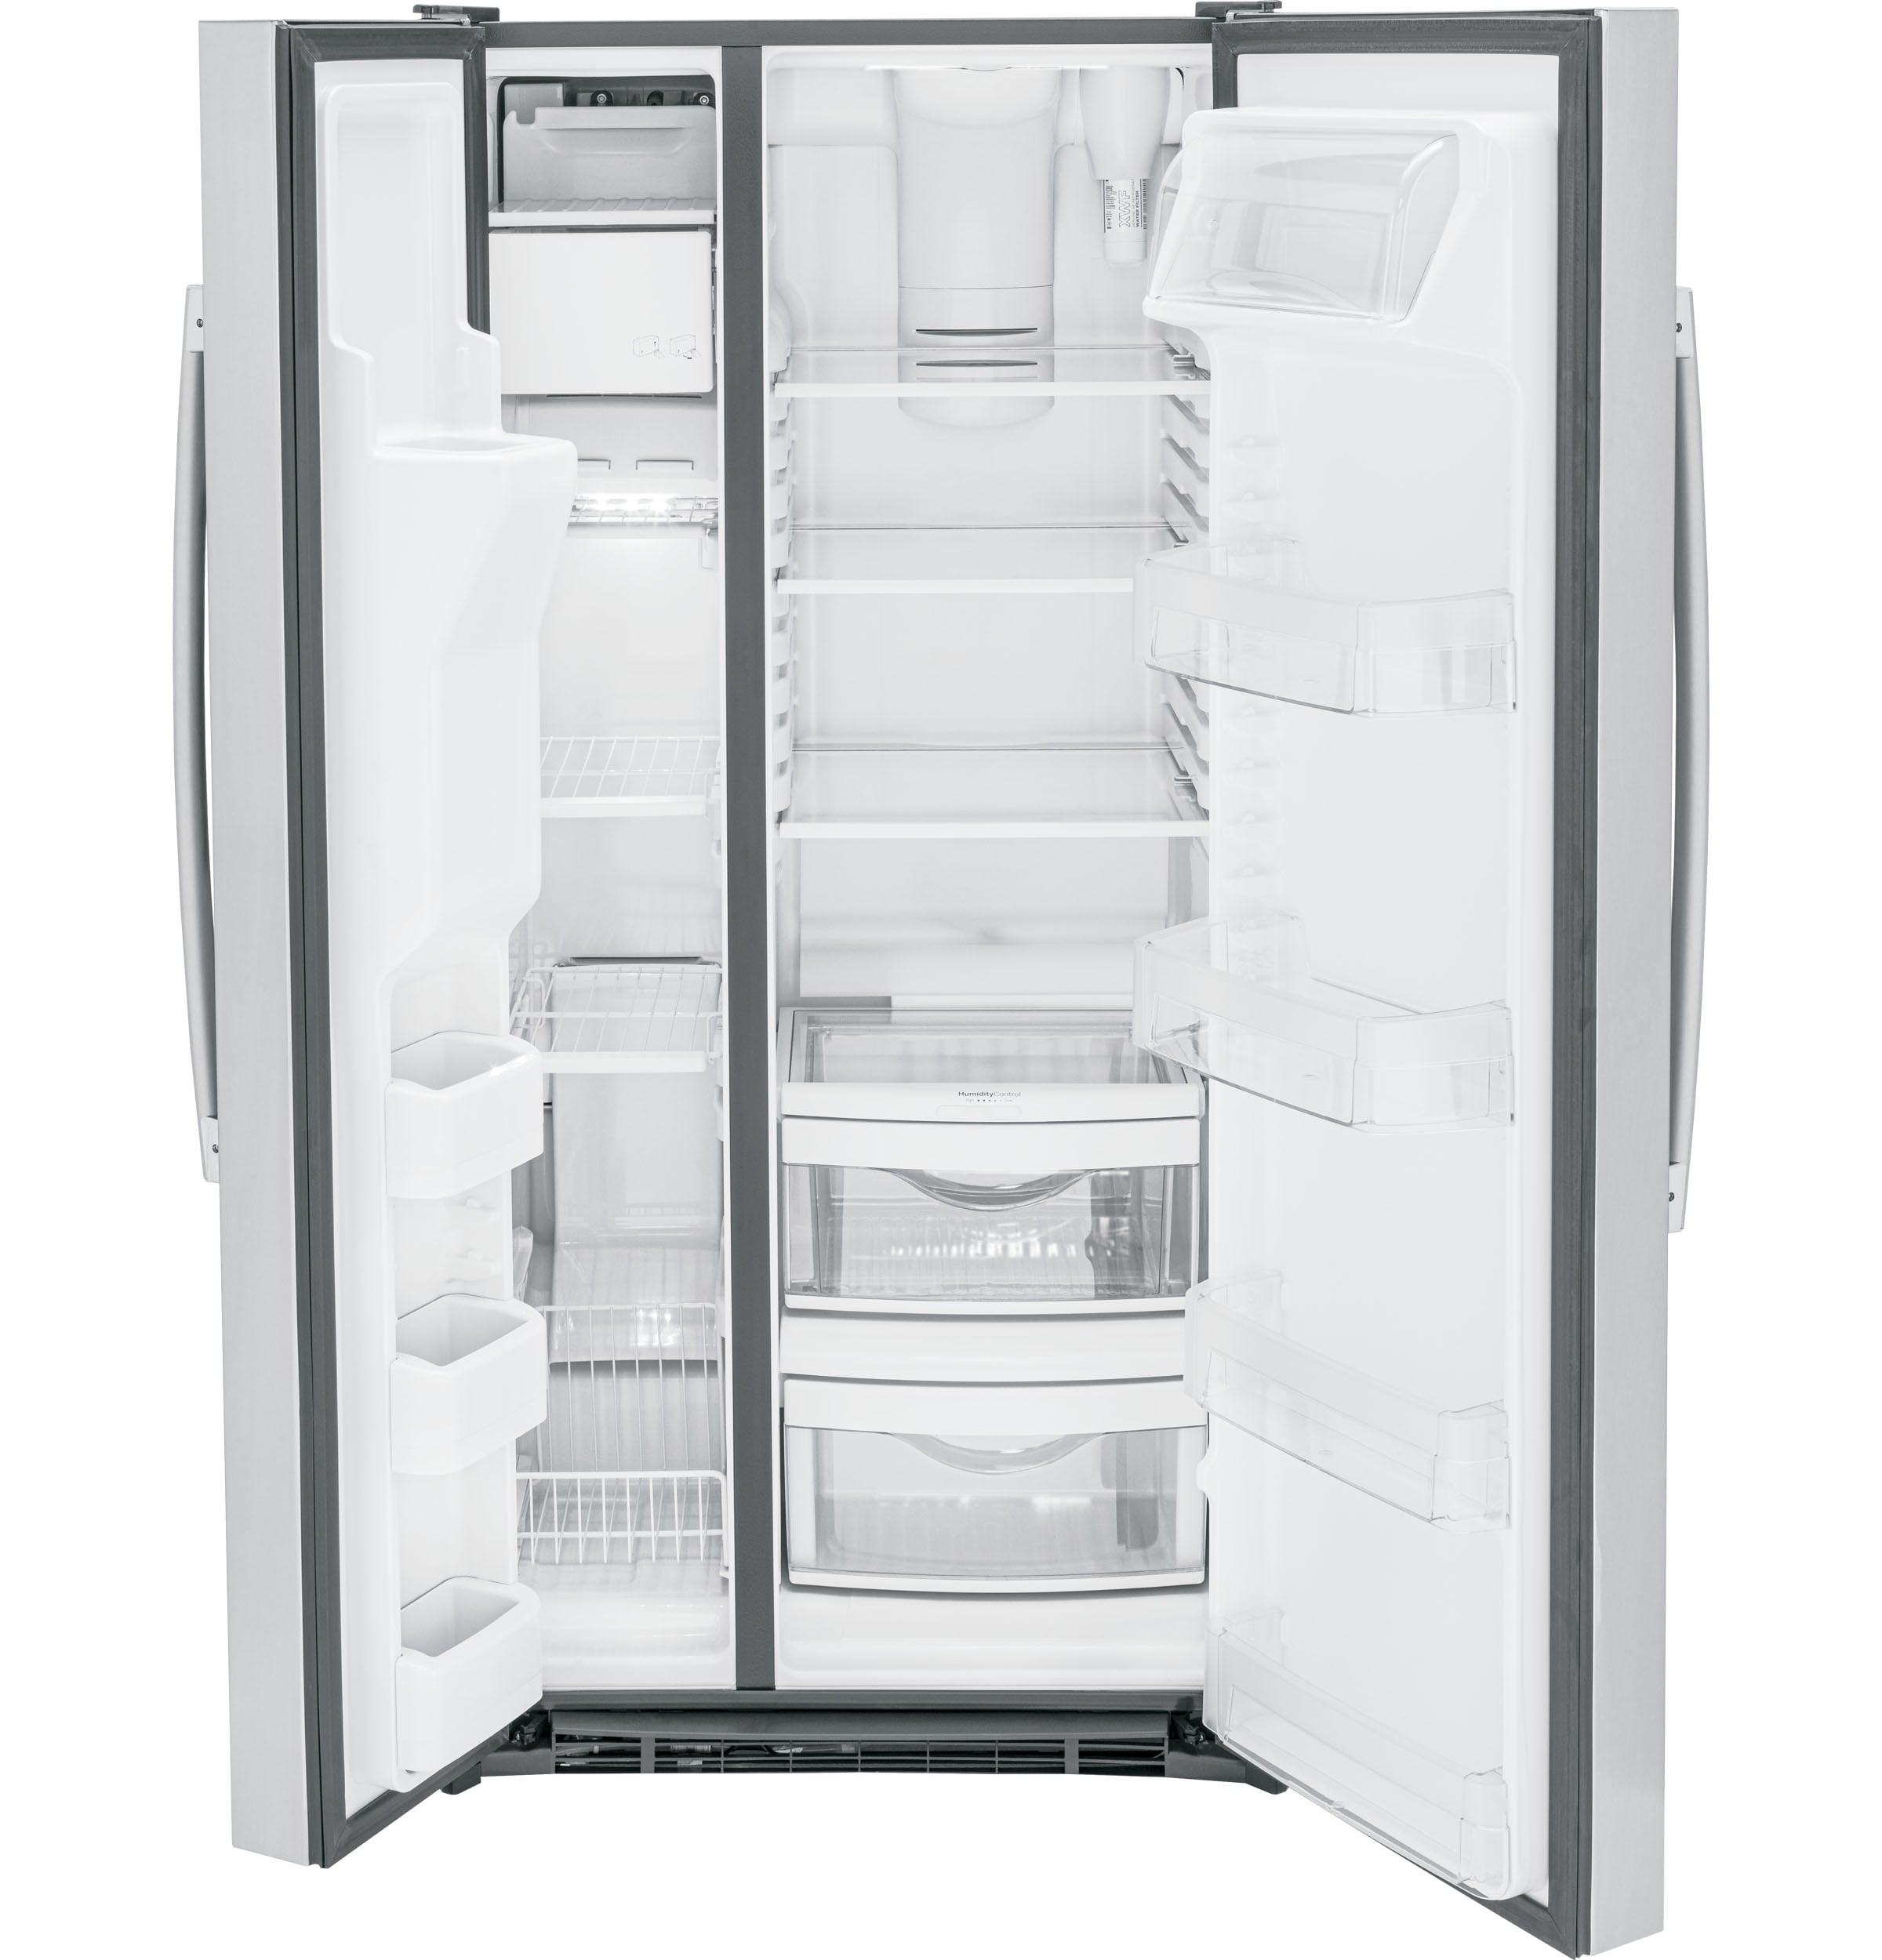 Frigidaire Gallery 22.3-cu ft Side-by-Side Refrigerator with Ice